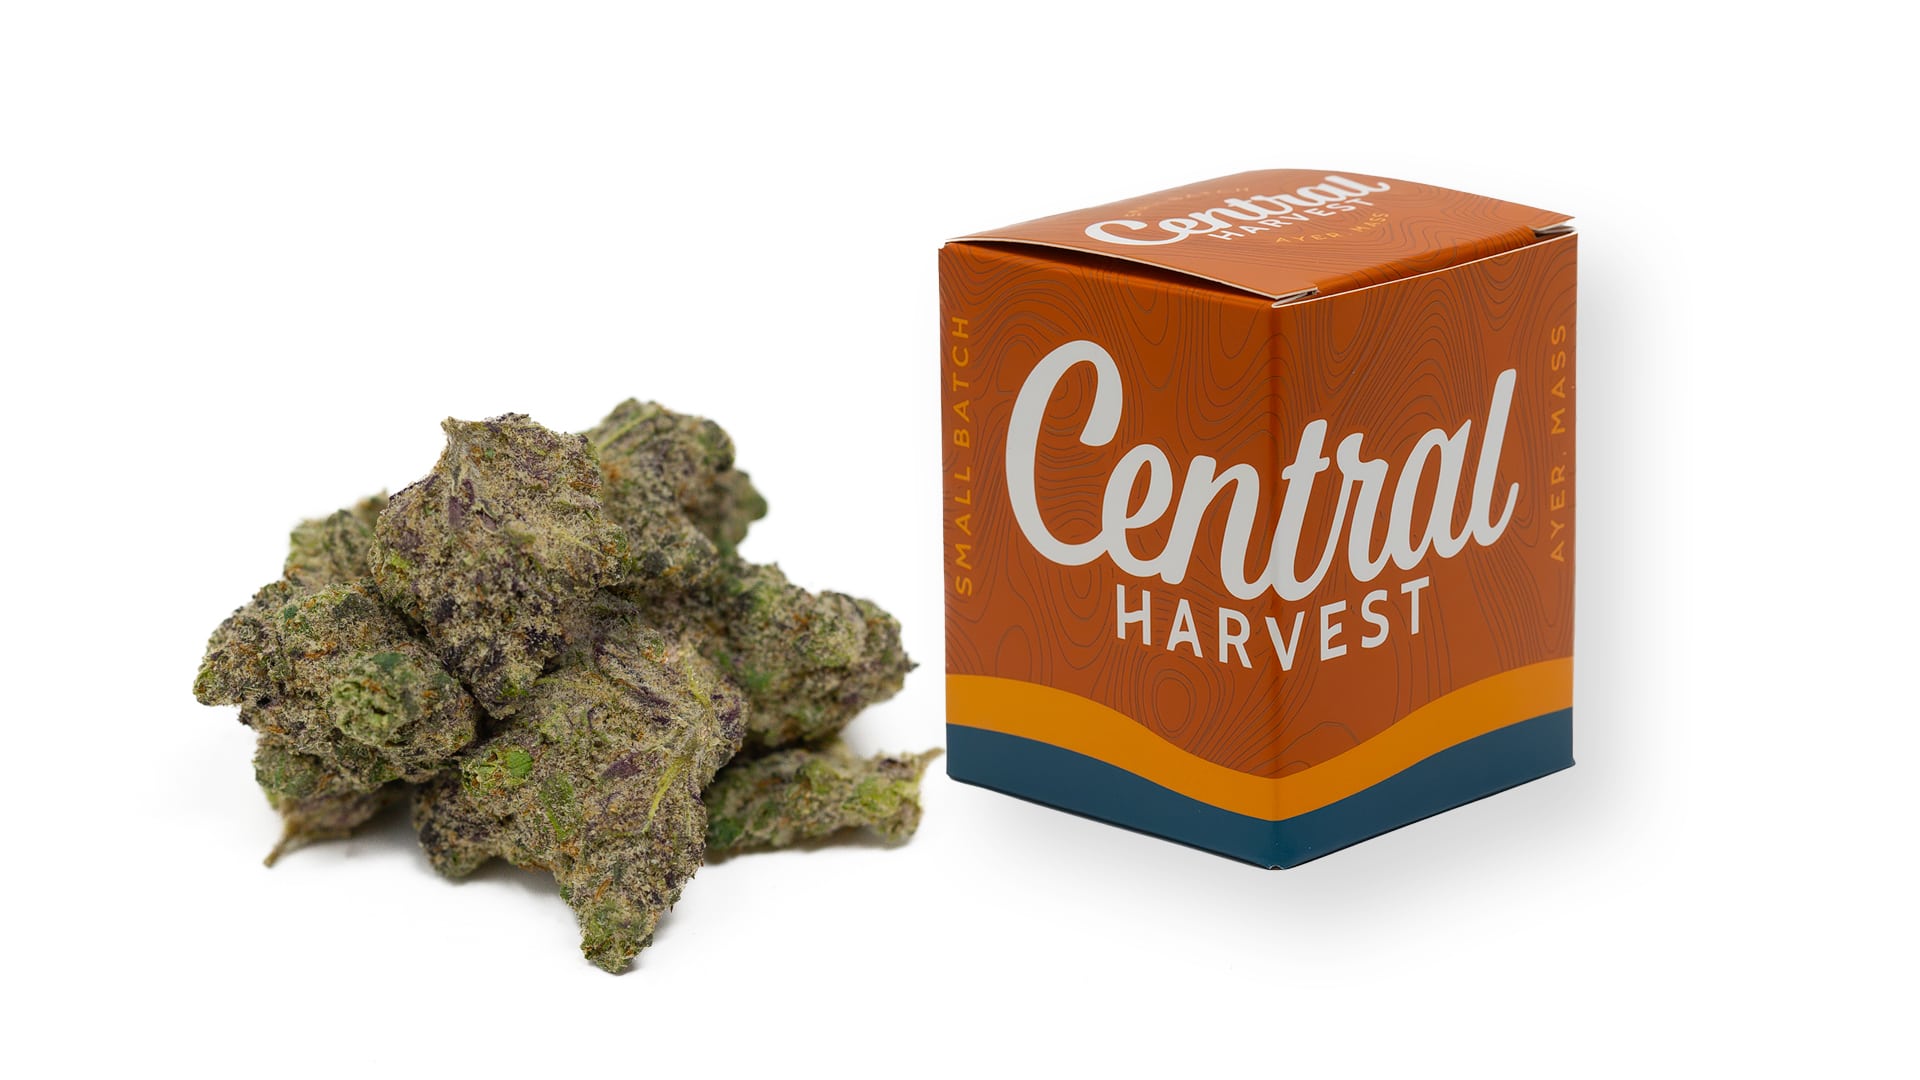 Too Cool is a Hybrid Cannabis Strain grown at Central Harvest